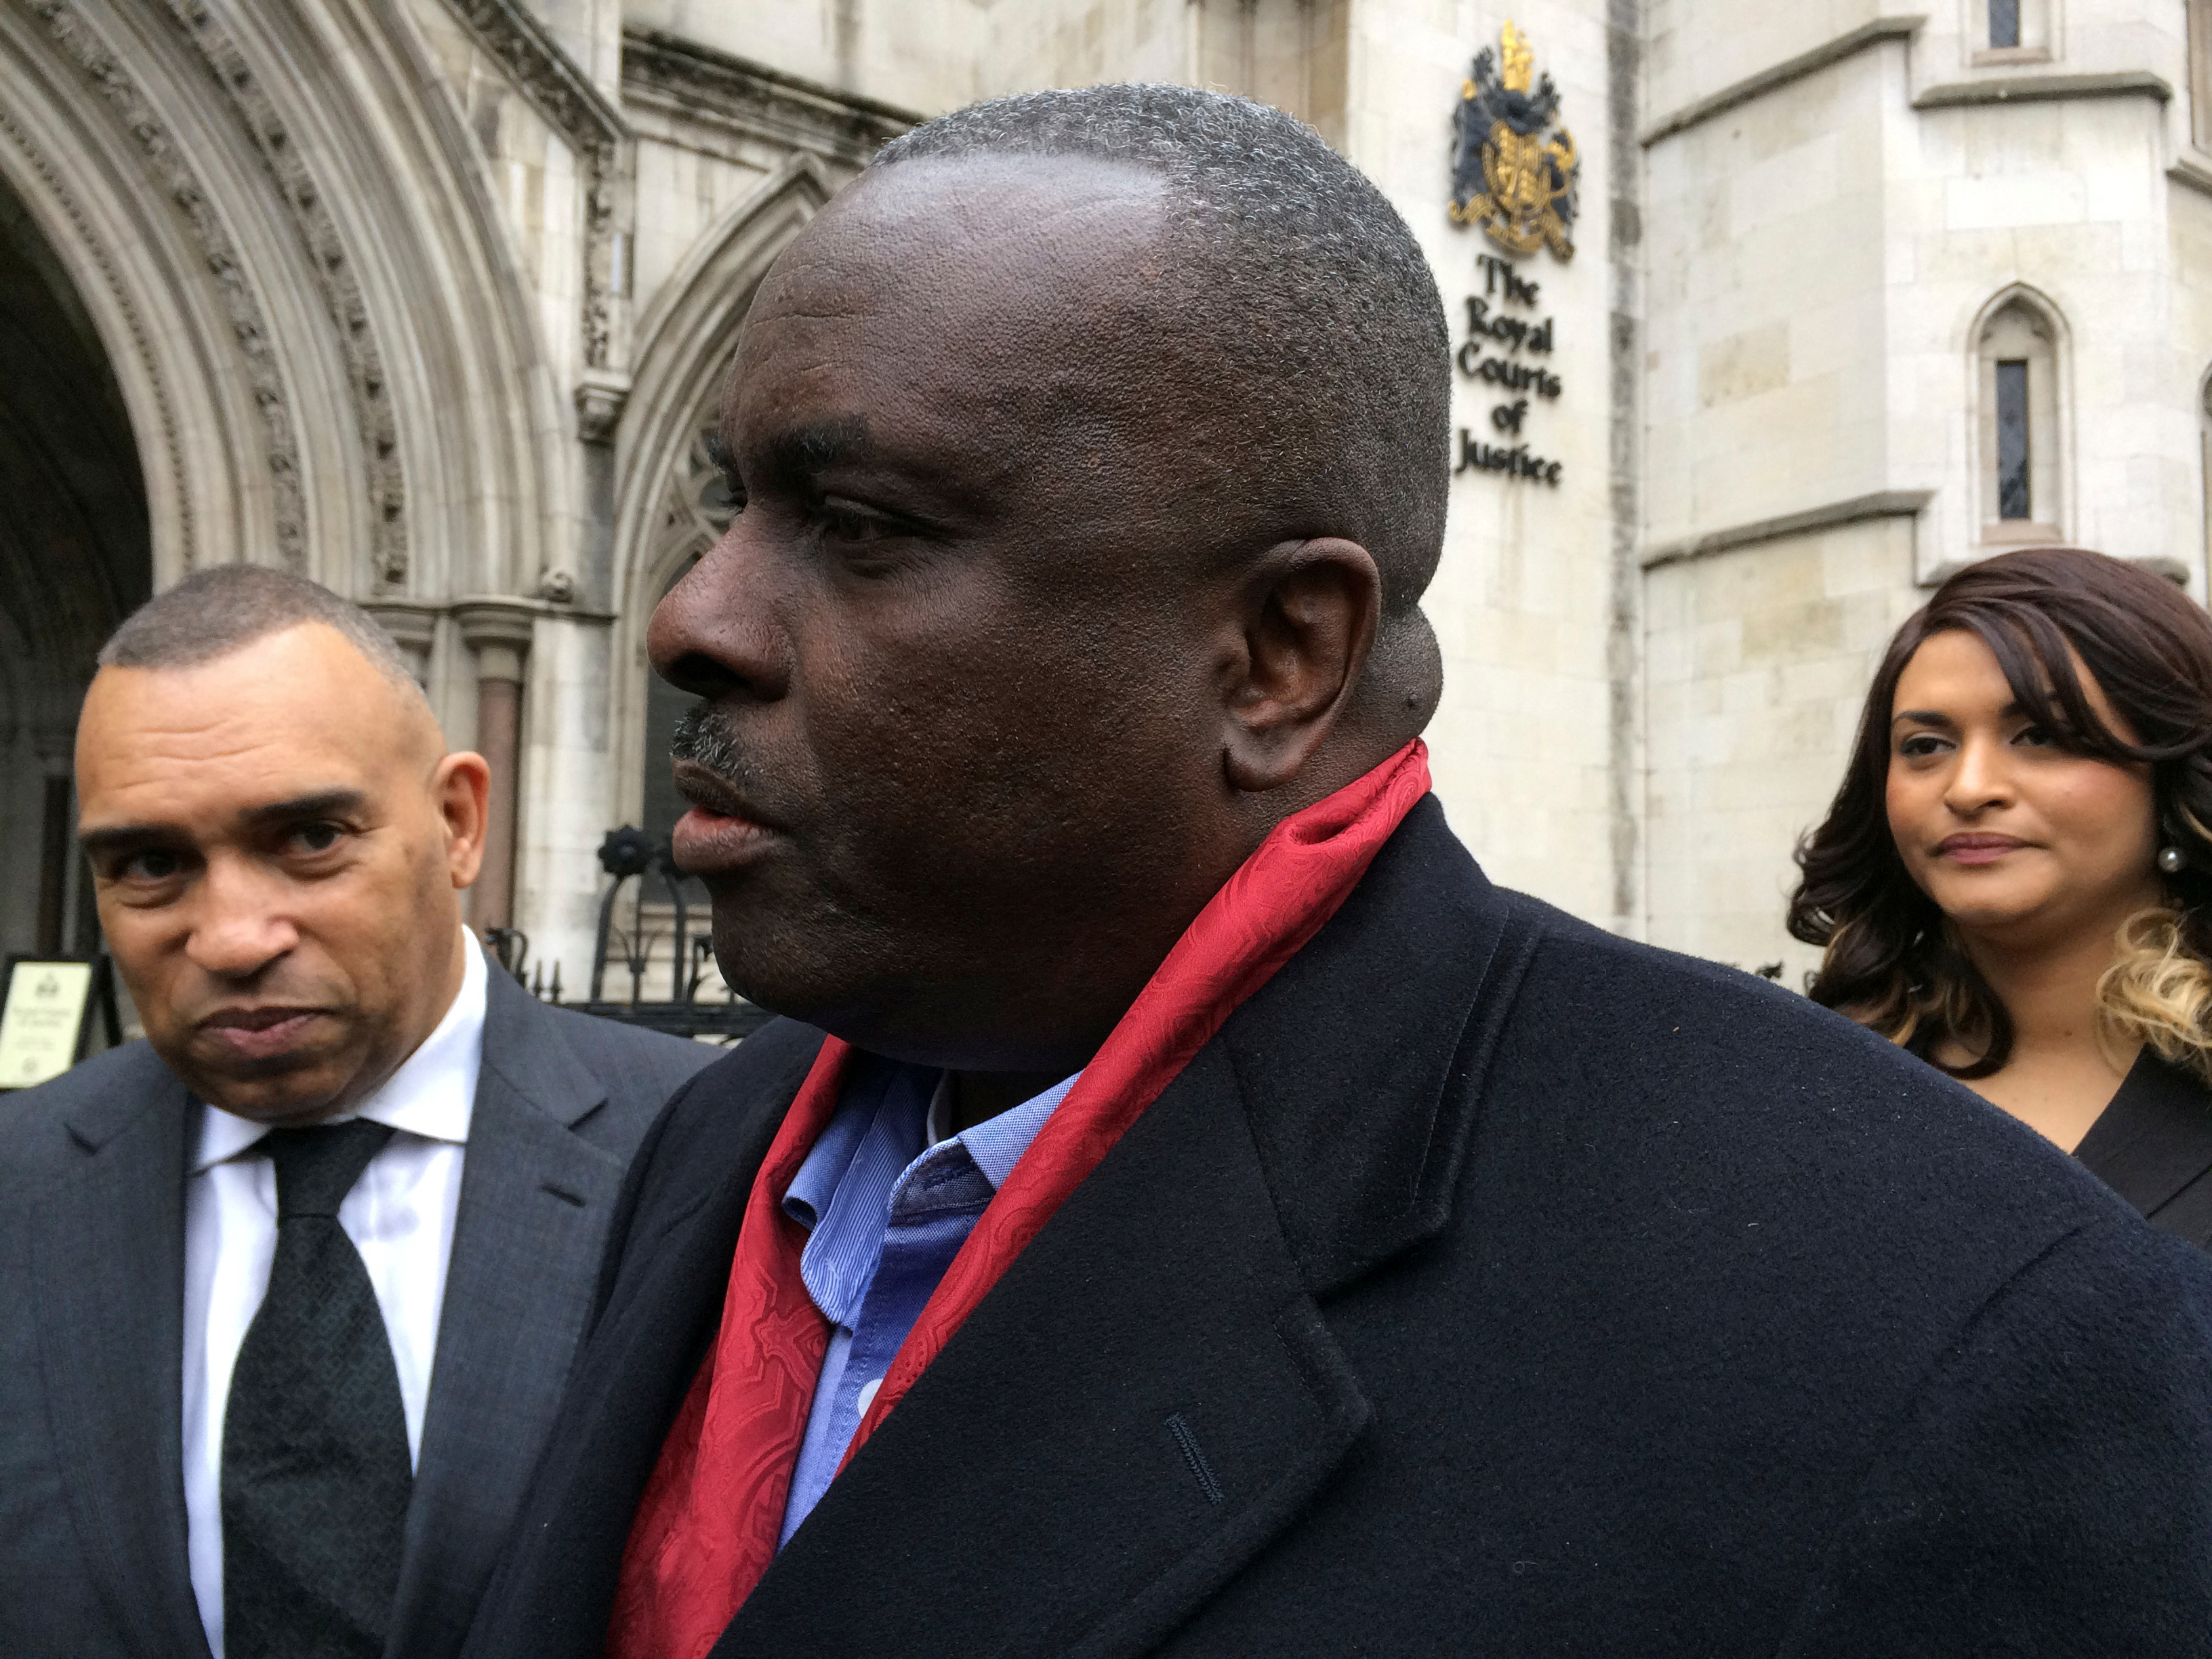 James Ibori, former governor of Nigeria's Delta State, speaks after a court hearing outside the Royal Courts of Justice in London